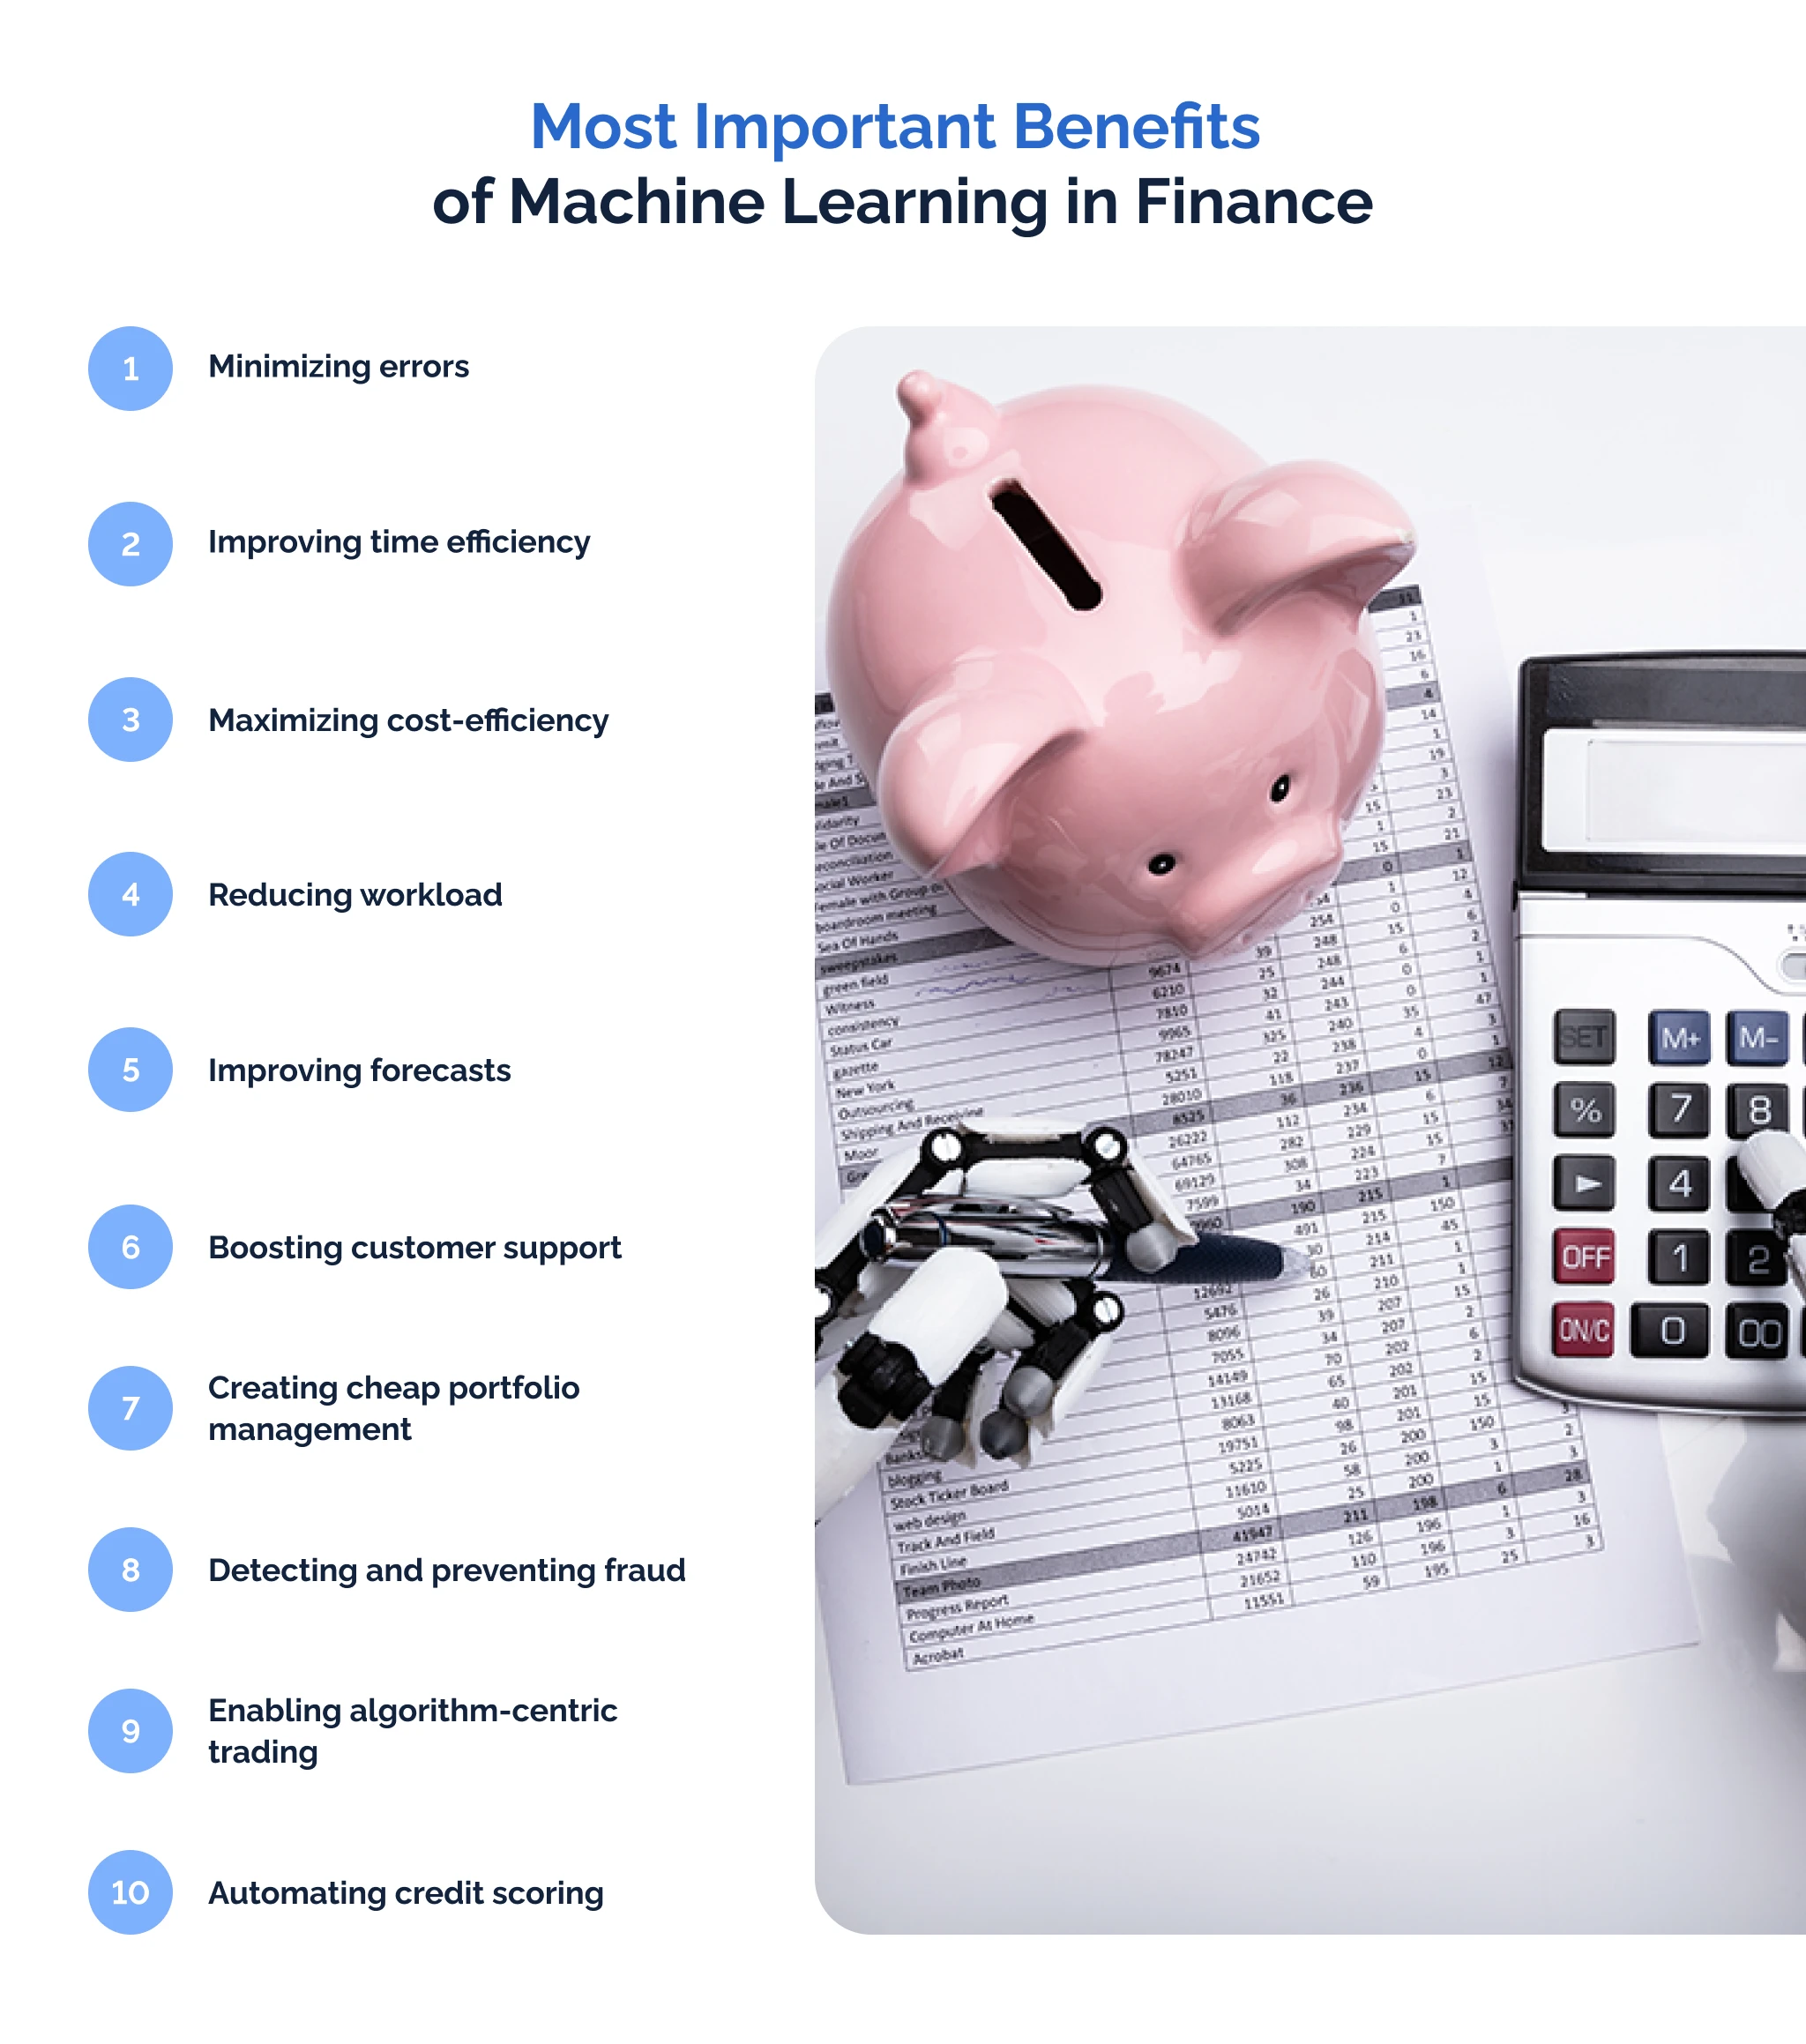 Most Important Benefits of Machine Learning in Finance